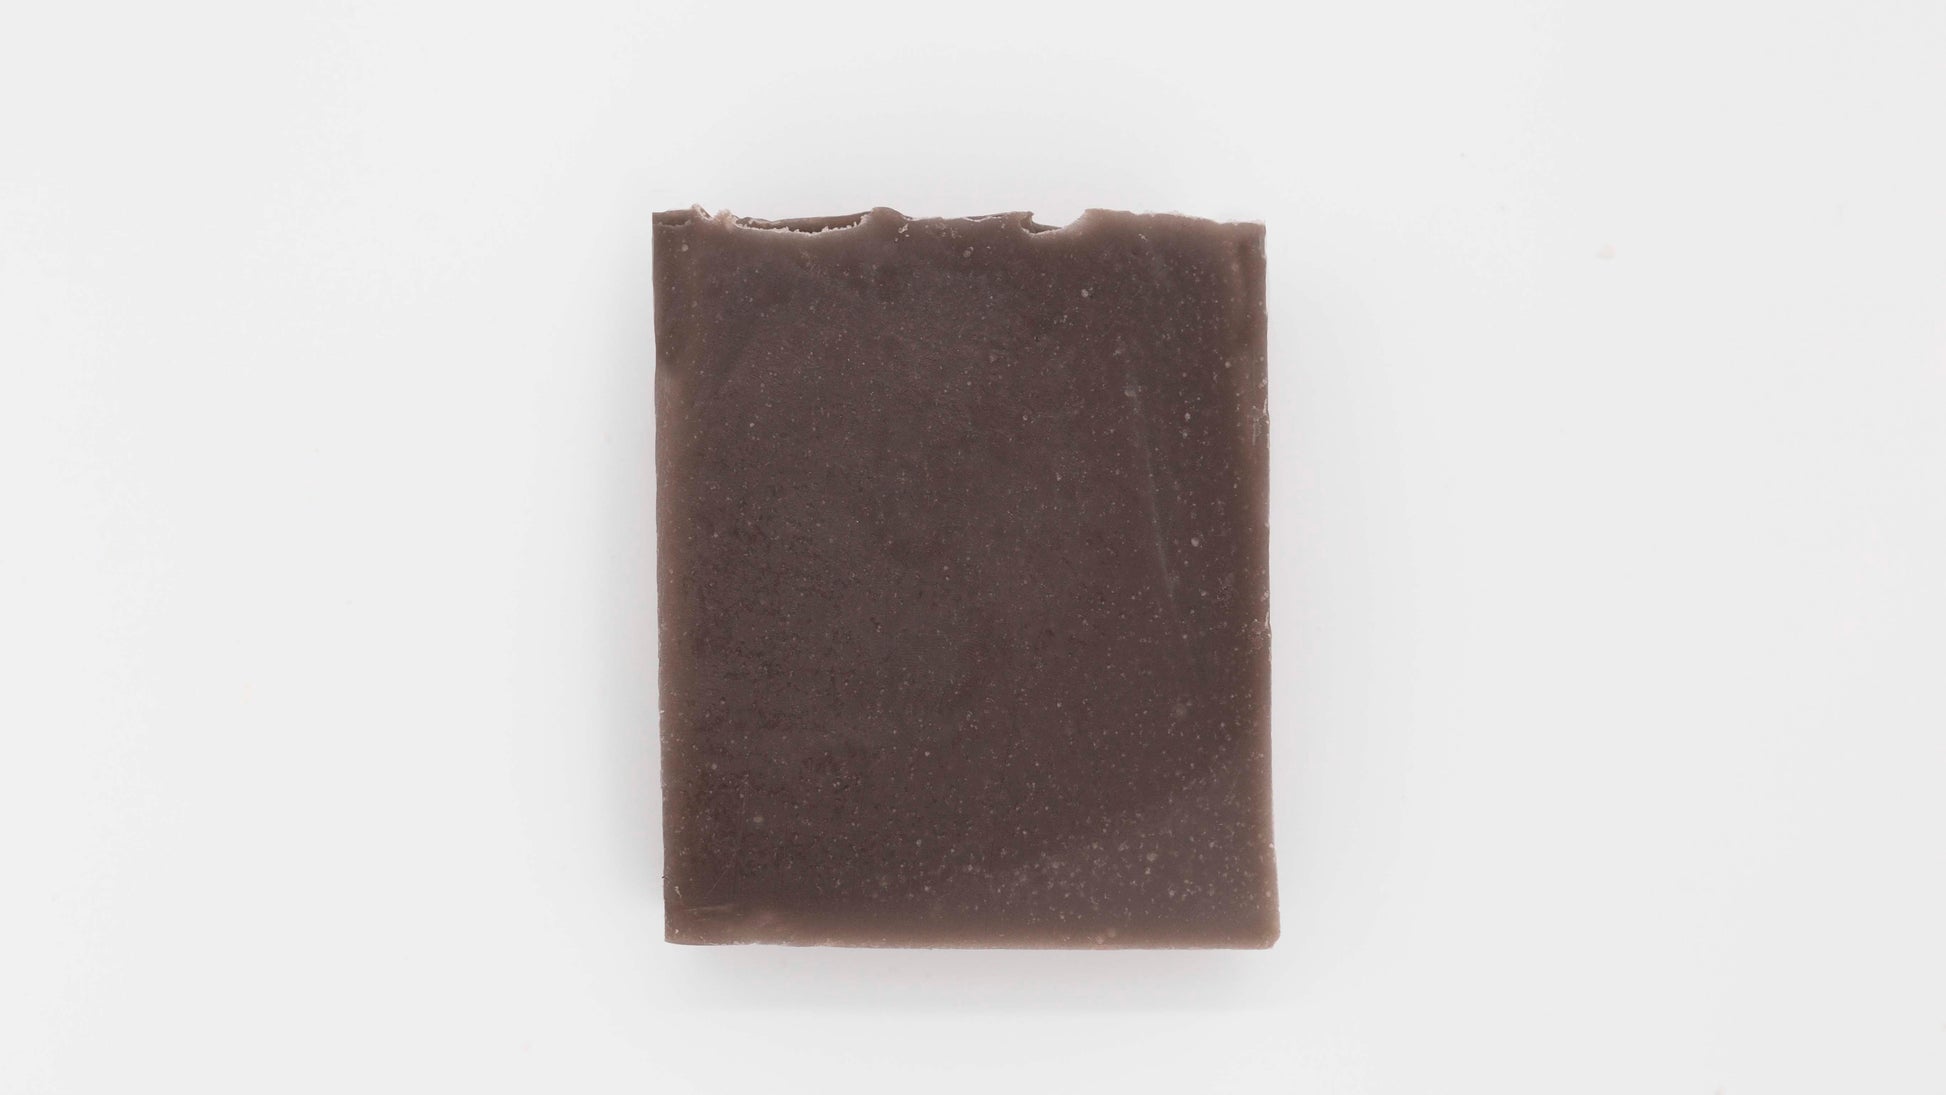 Close up image of a brown Cedarwood patchouli soap on a clean white background